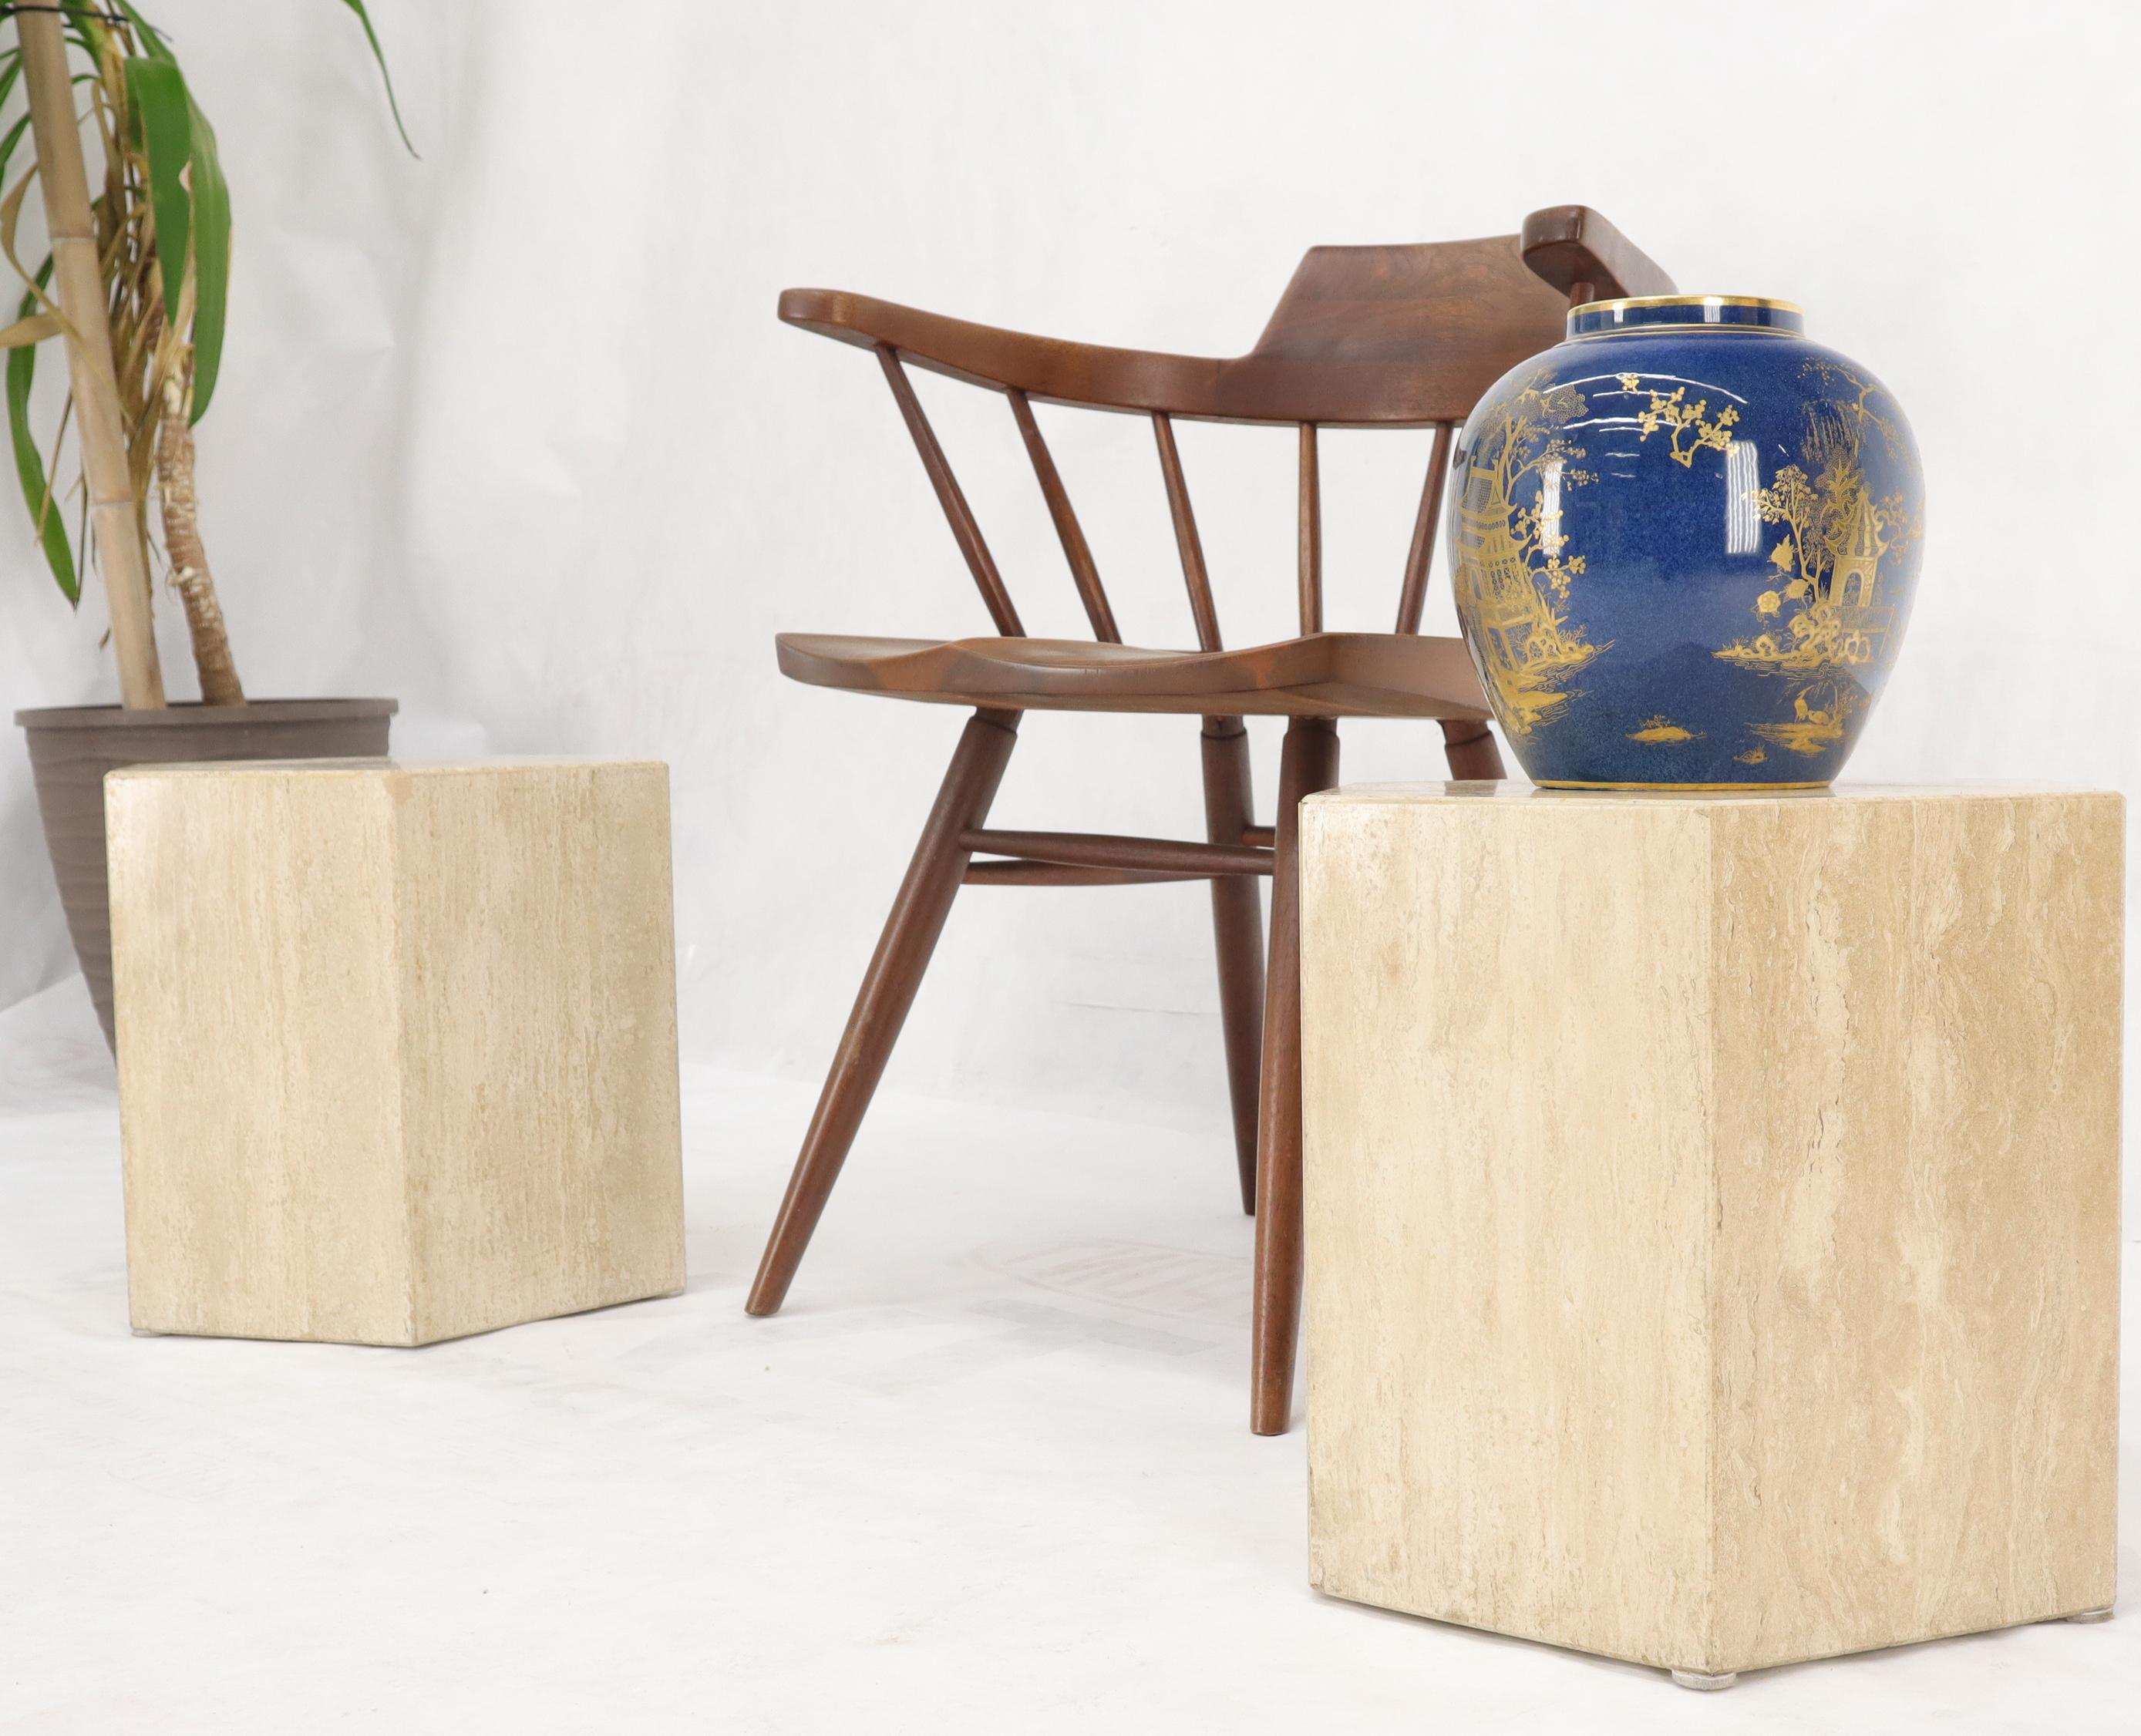 North American Pair of Mid-Century Modern Hexagon Shape Travertine Marble End Tables Pedestals